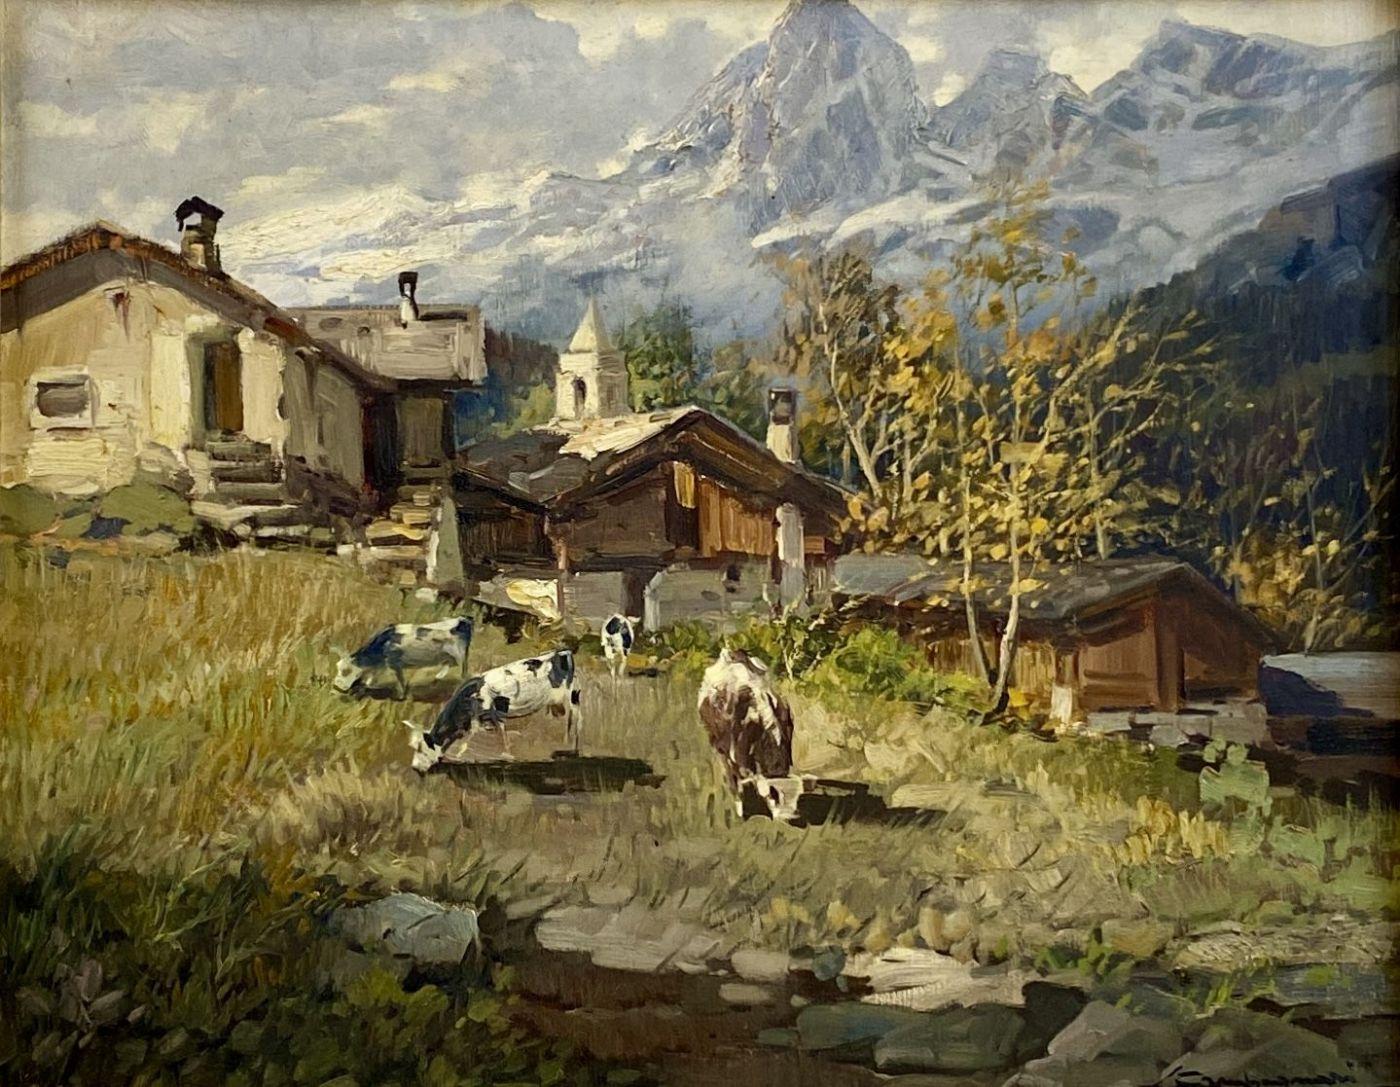 The painting for sale is an oil on canvas by Licinio Campagnari,  born in Mestre in 1920 and died in Andora in 1981. His favorite subjects are the mountains of the Aosta Valley, often depicted with pastures and typical dwellings. In fact, the